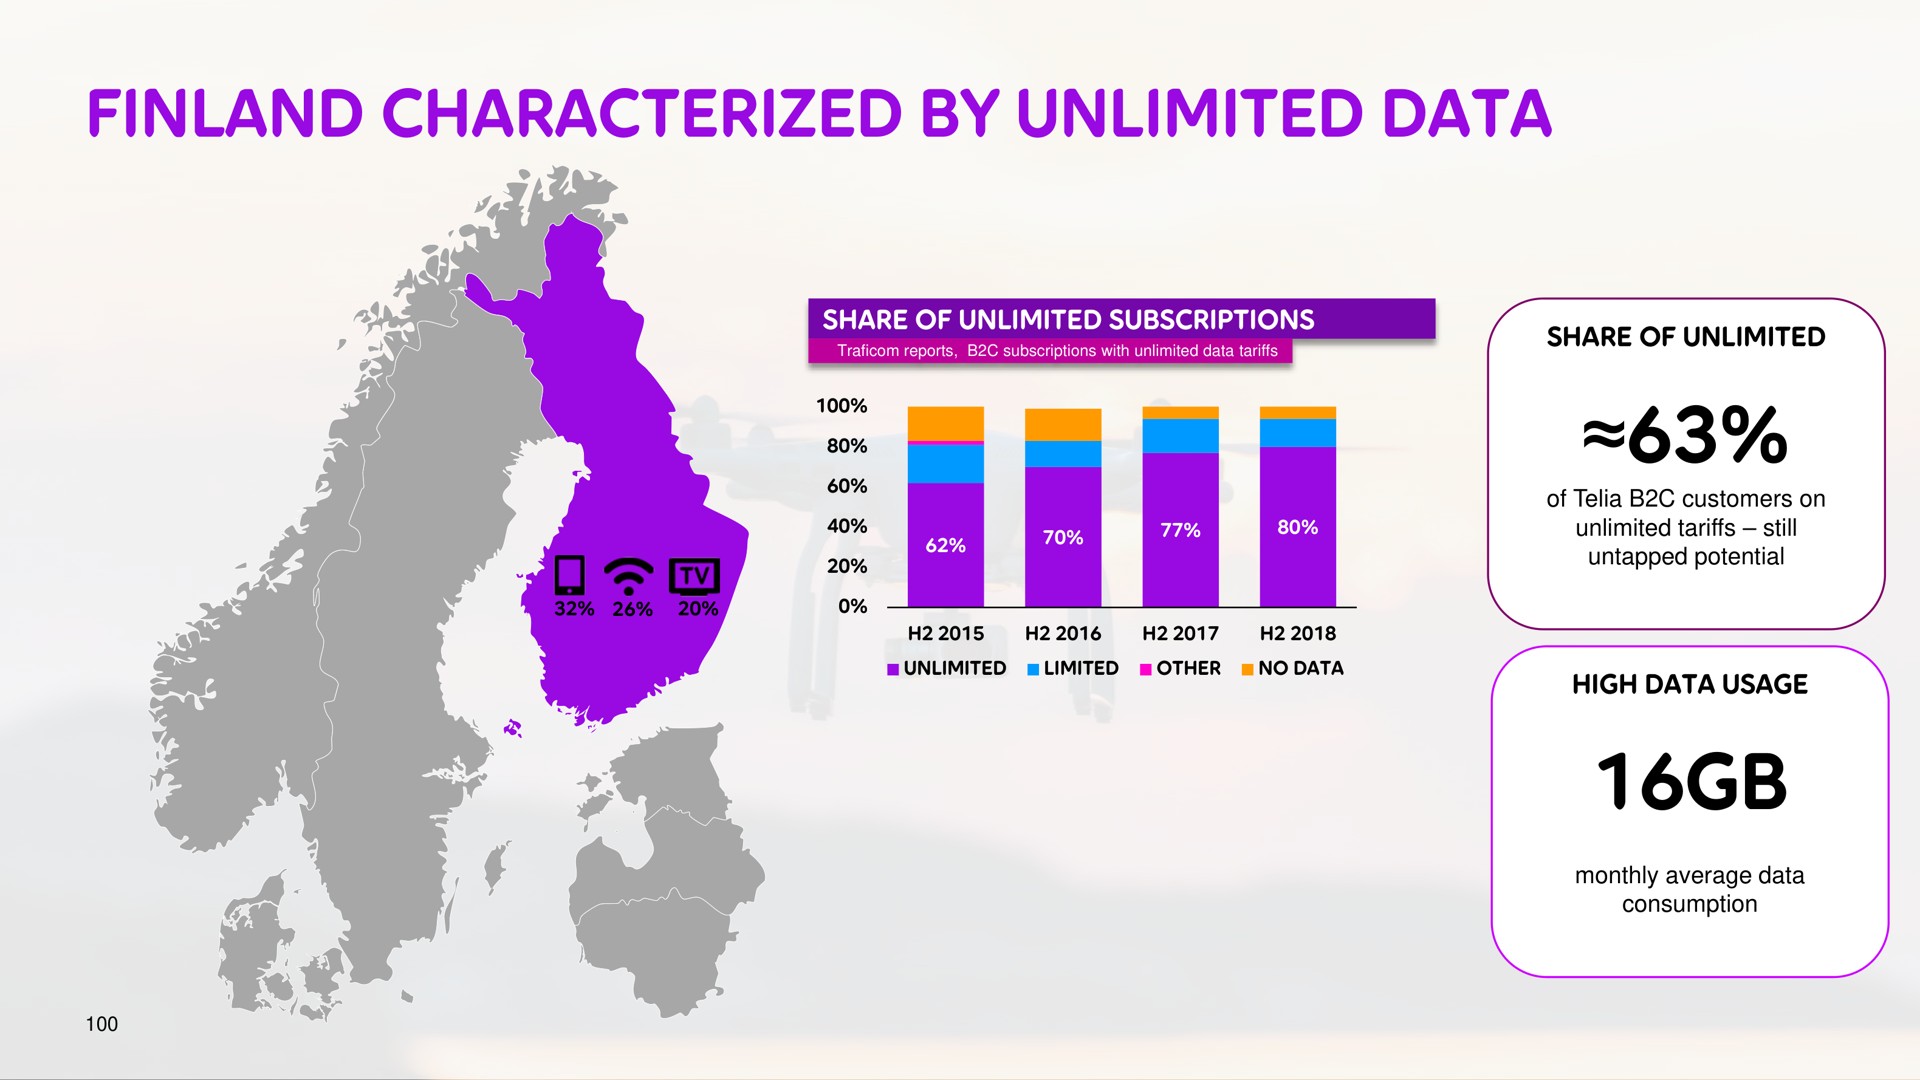 finland characterized by unlimited data | Telia Company